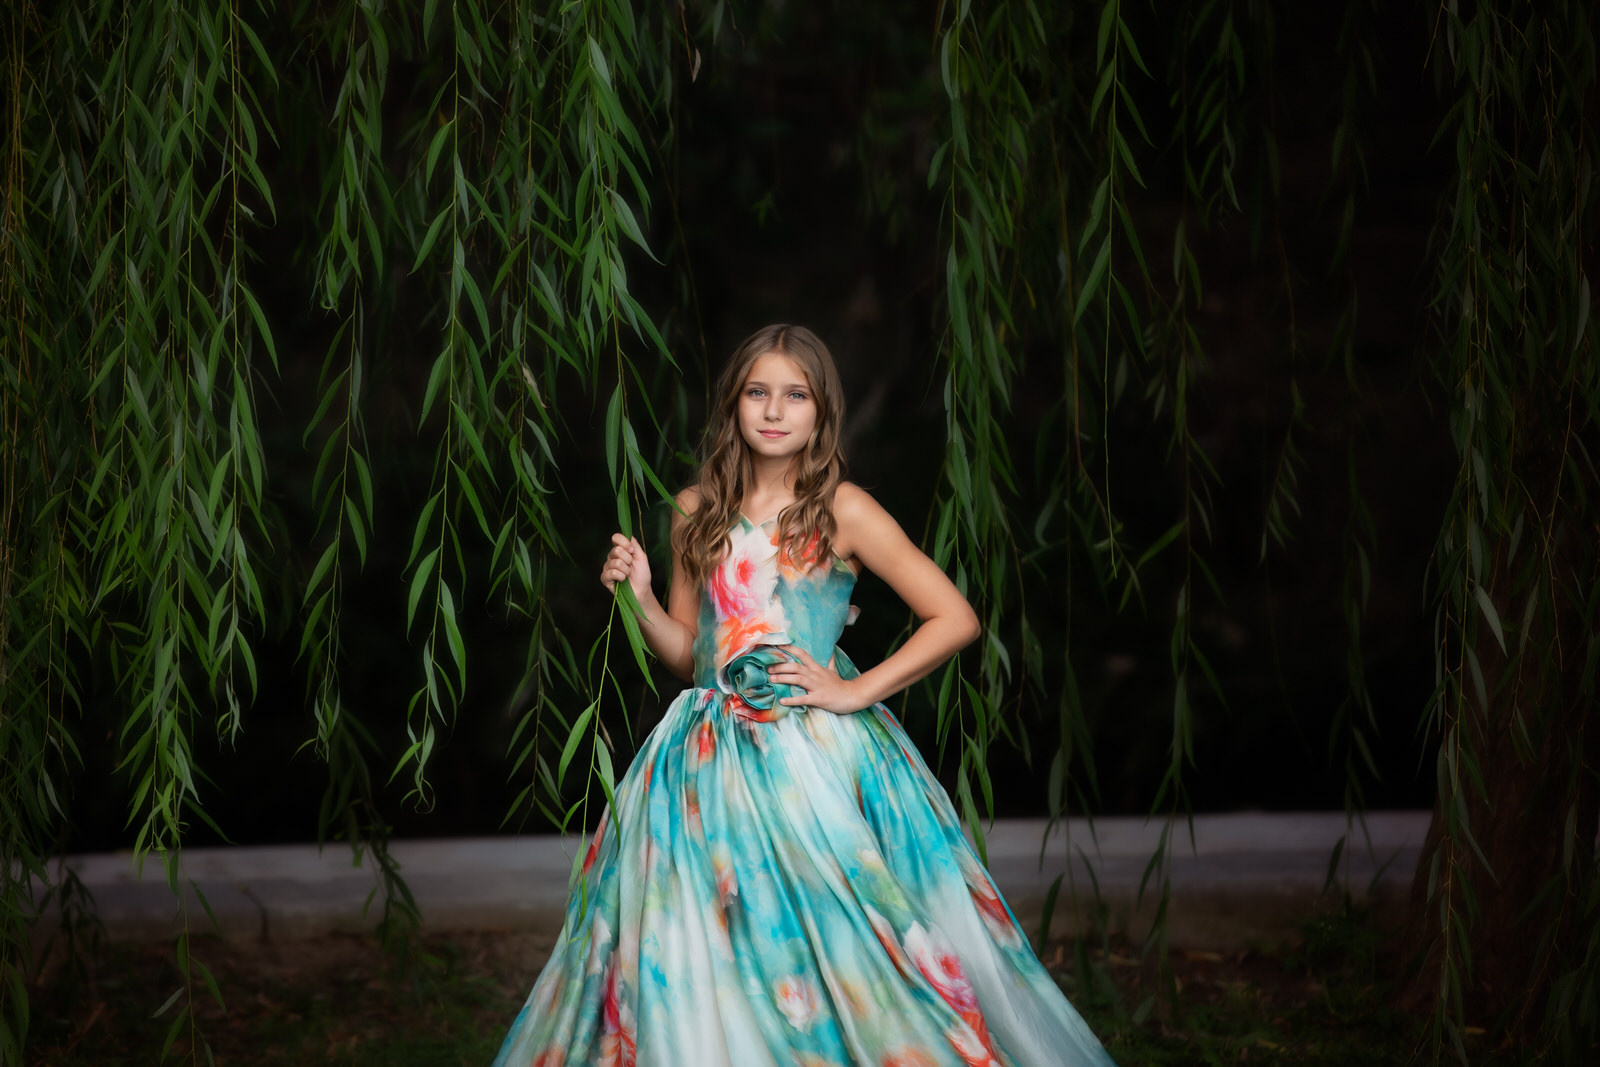 A young girl hold onto the branch of a large willow tree in a blue floral dress